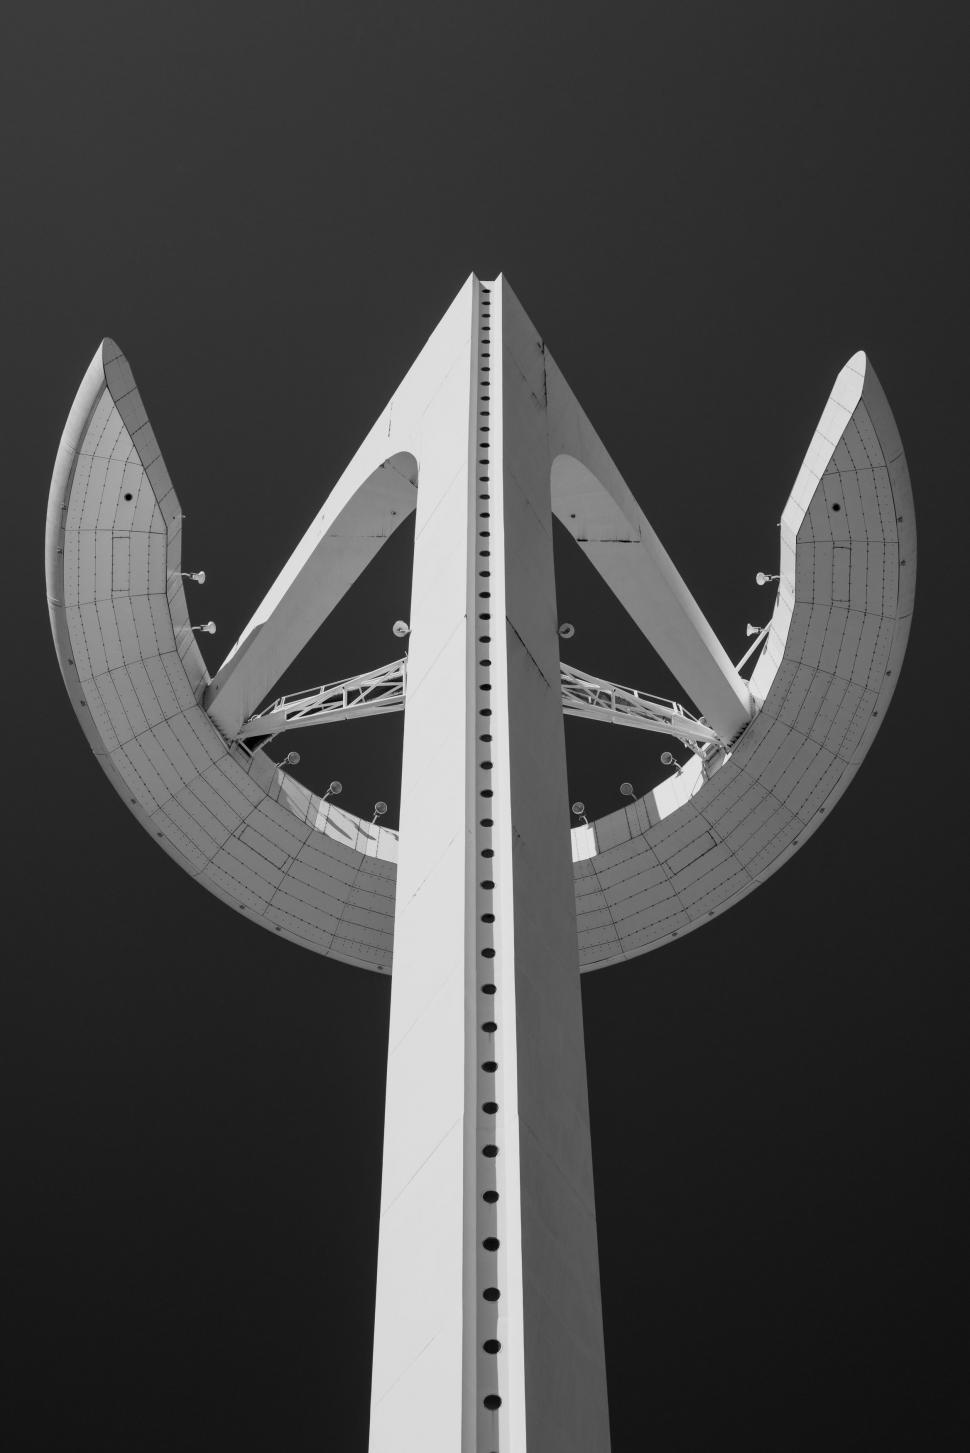 Free Image of Tall Tower in Black and White 